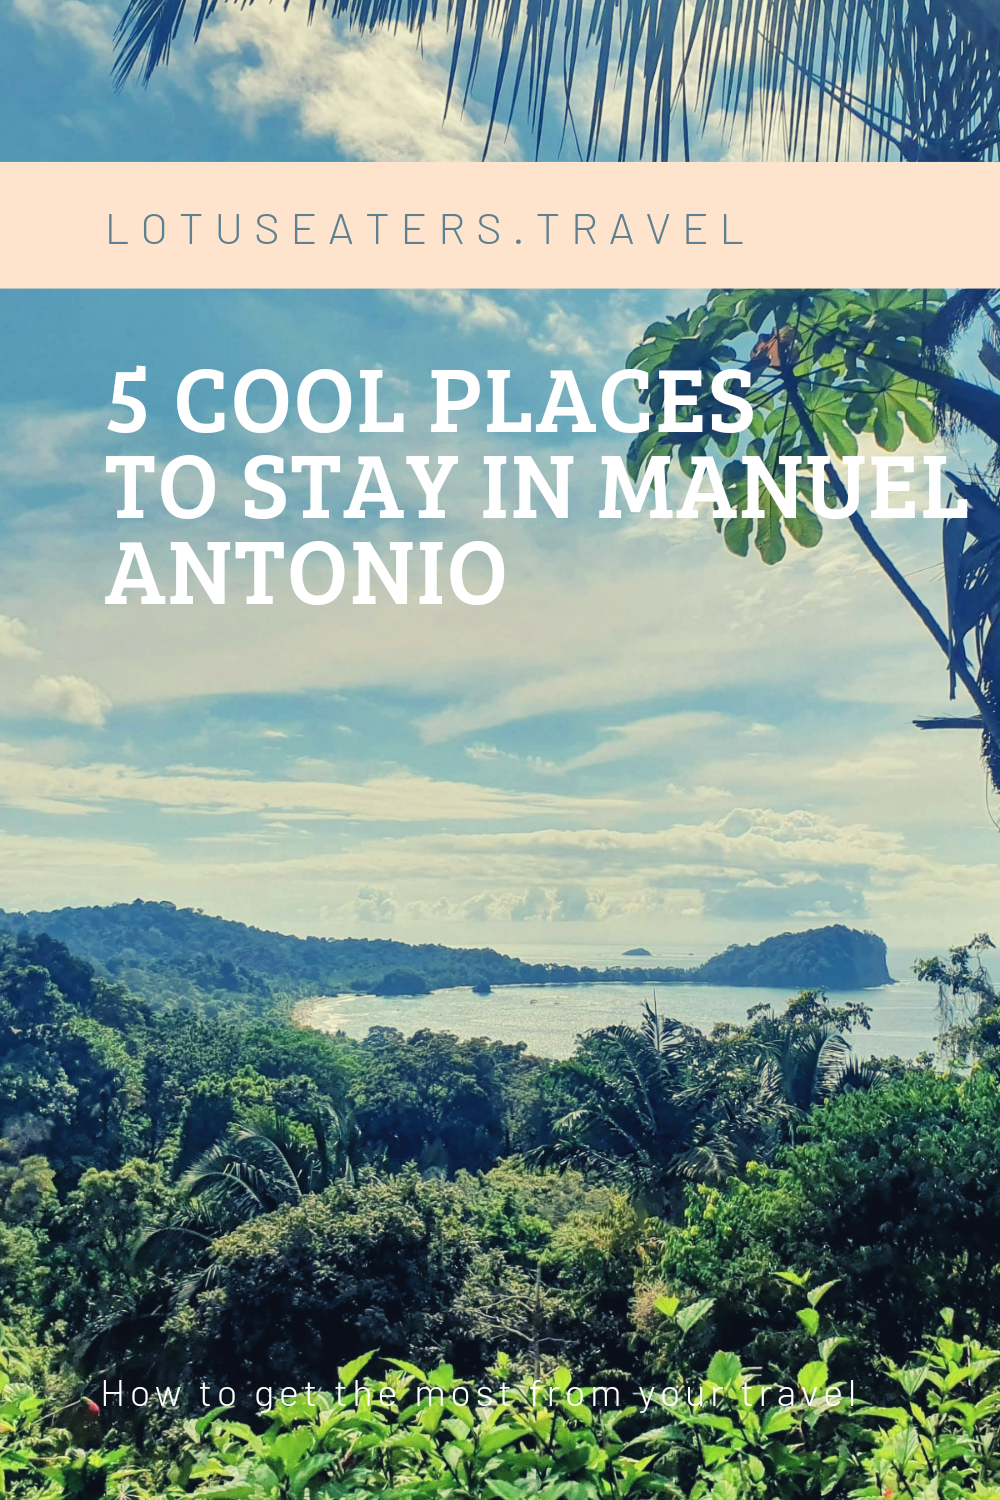 5 cool places to stay in Manuel Antonio, Costa Rica